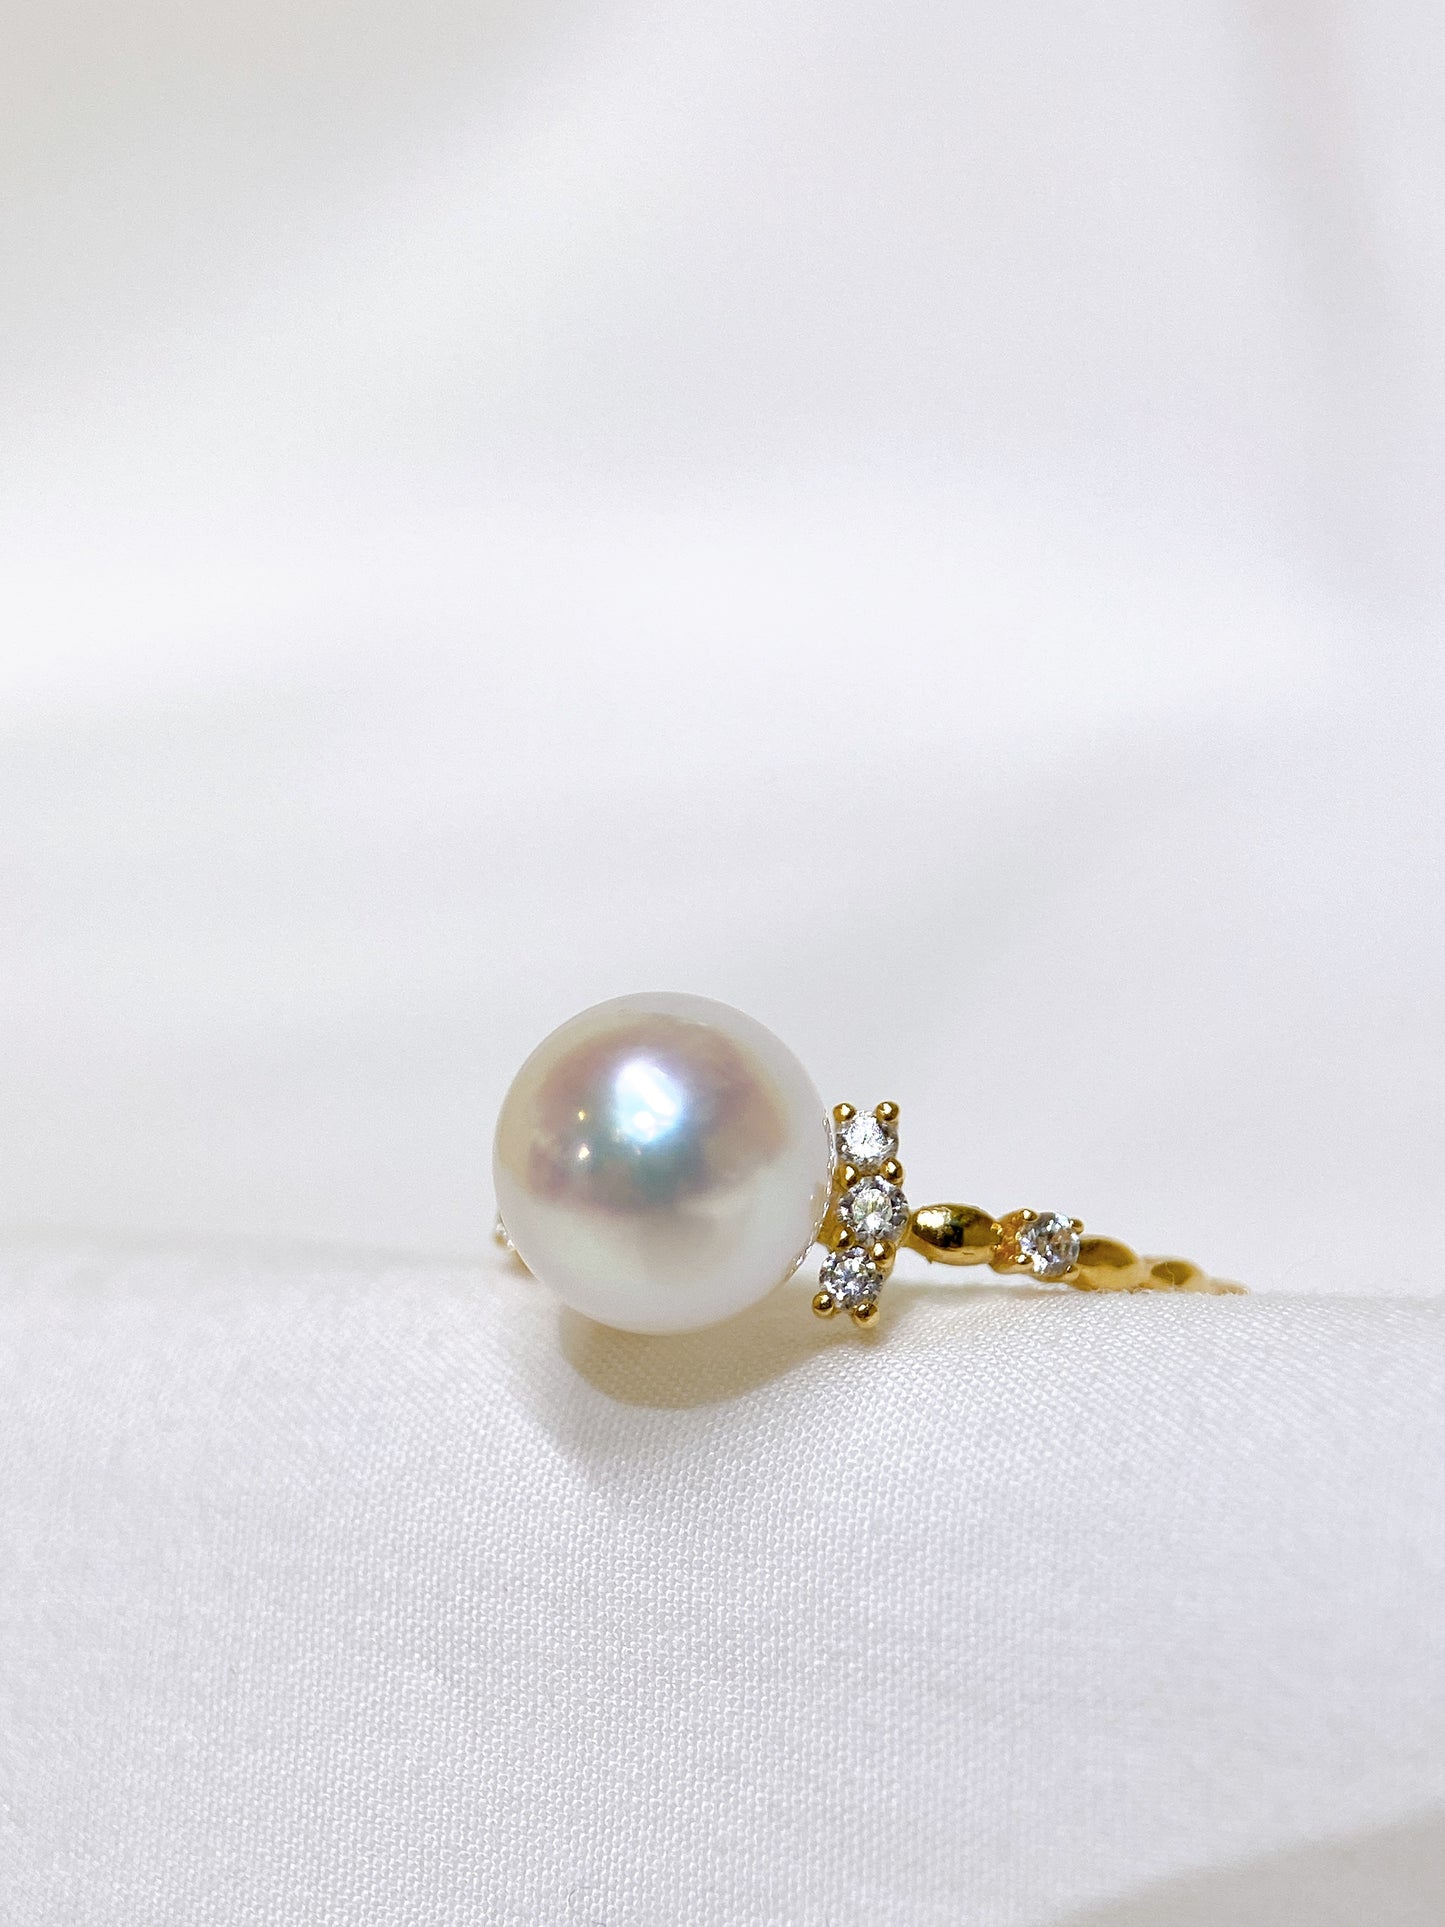 Akoya Pearl Ring in 18K Yellow Gold with Diamond d0.08ct,7.5-8mm